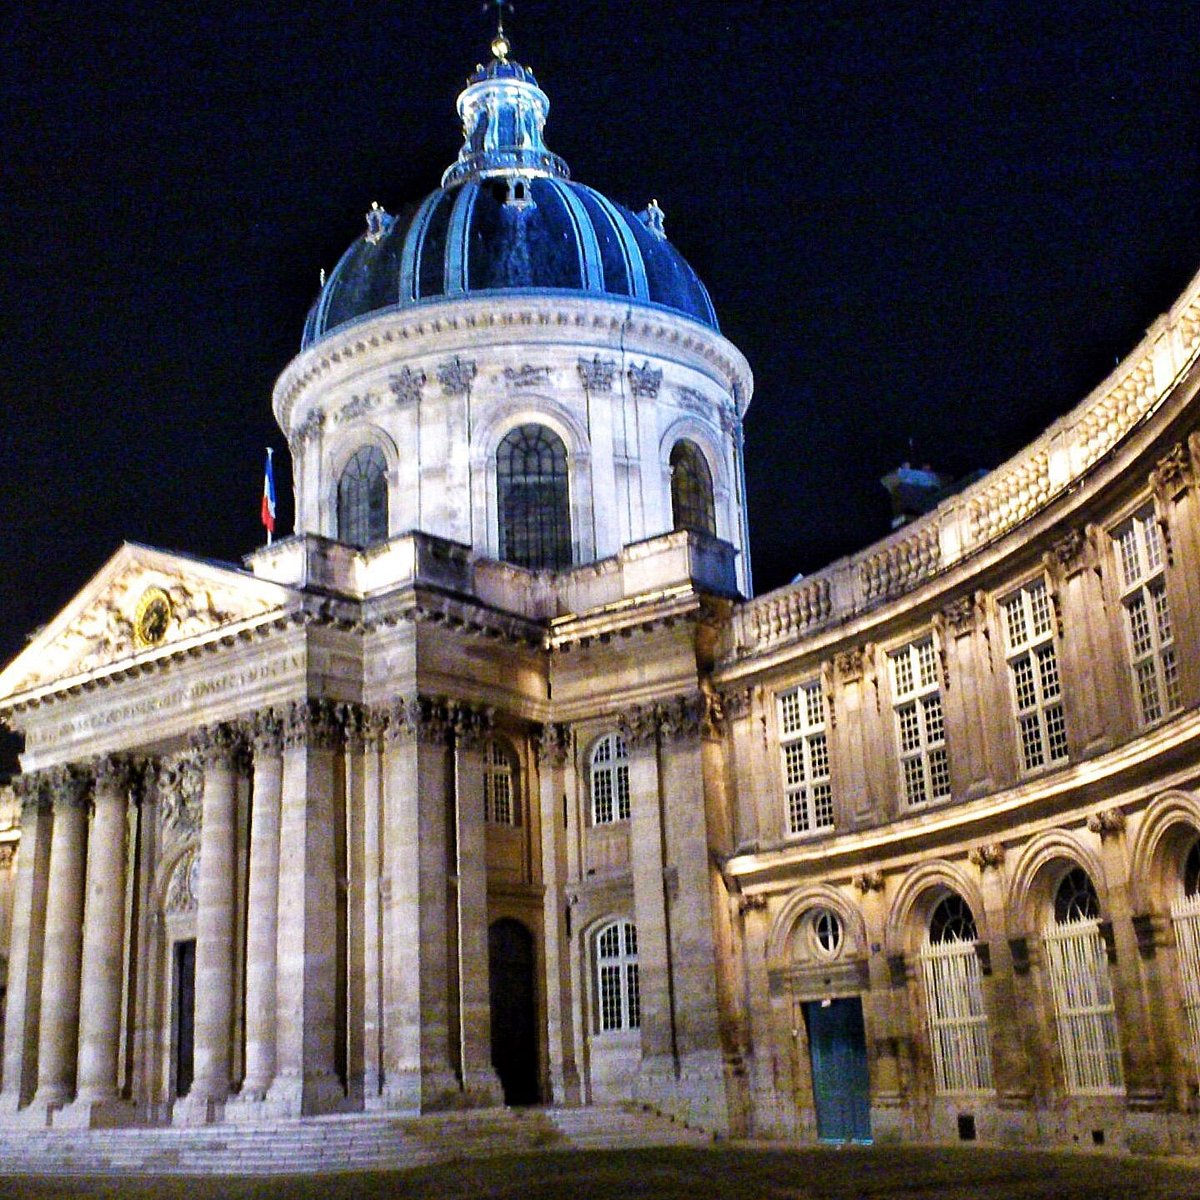 Institut de France - All You Need to Know BEFORE You Go (with Photos)